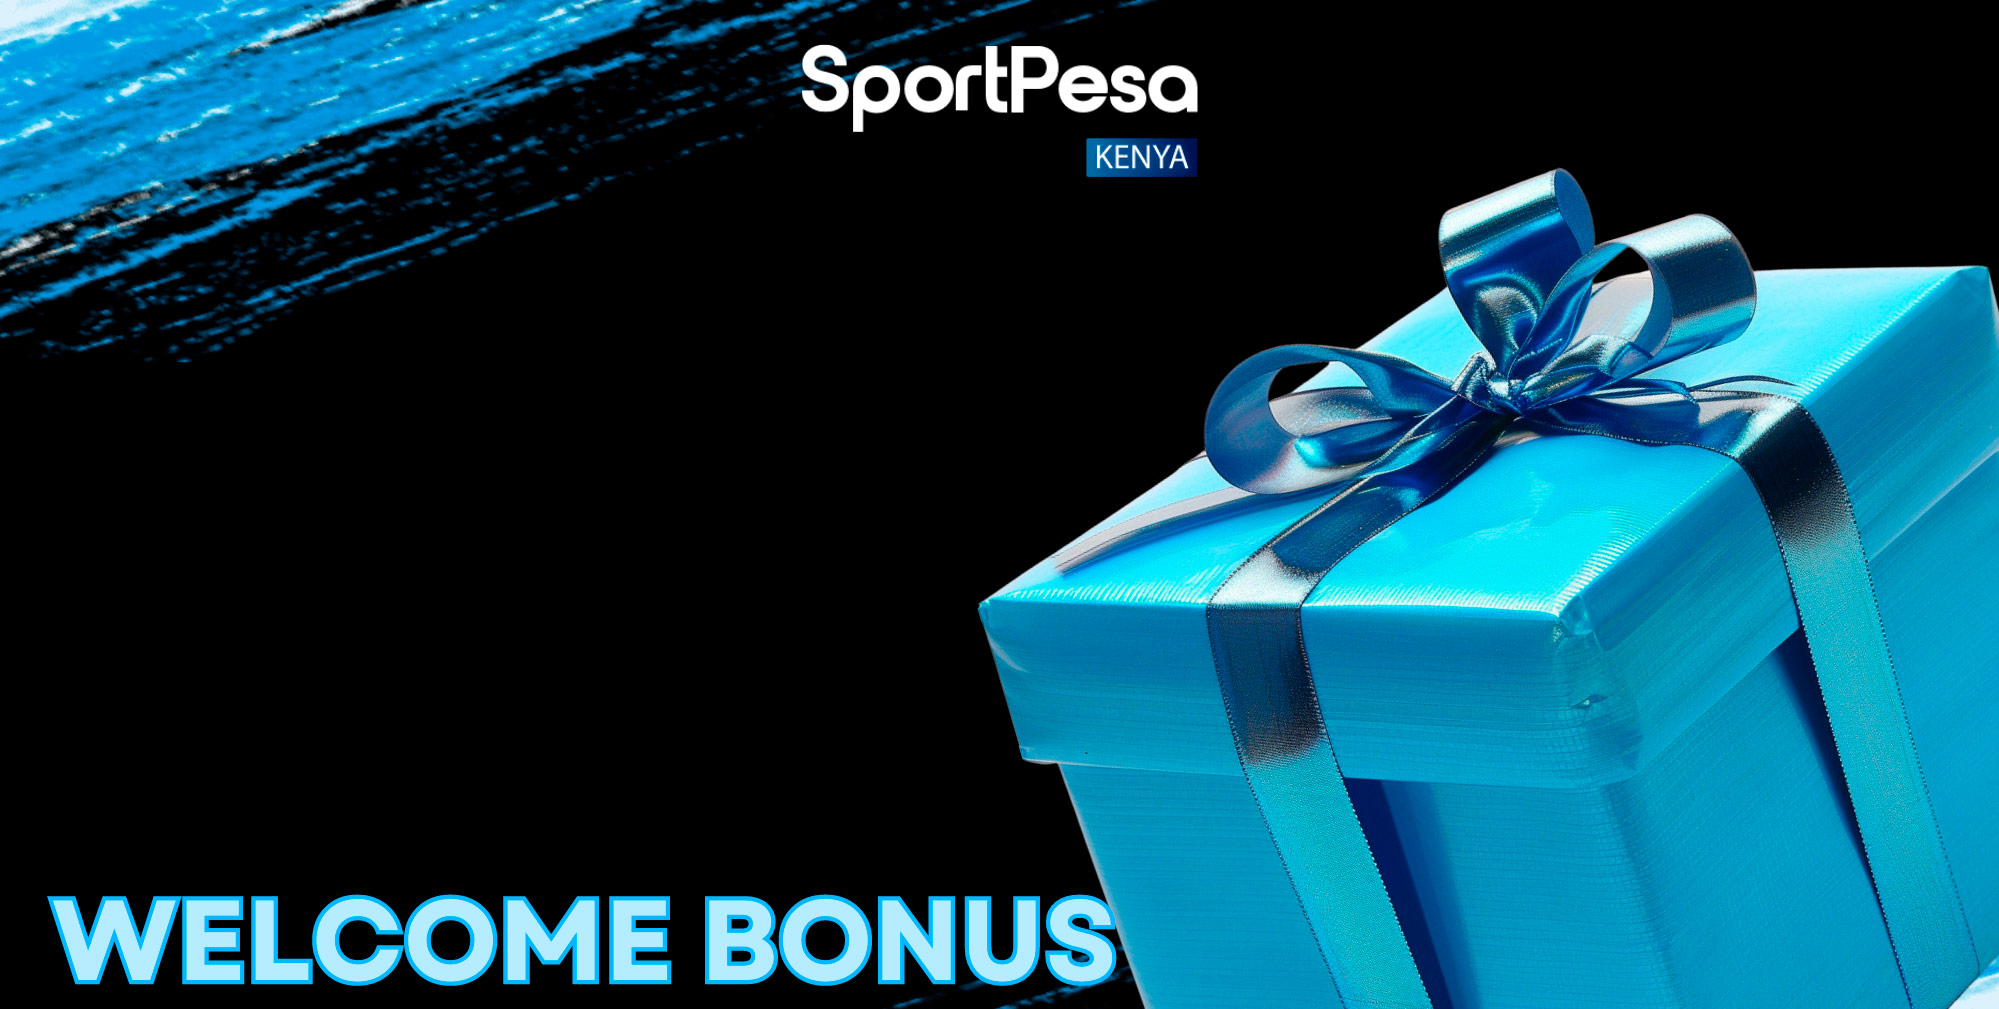 Sportpesa gives all players a generous welcome bonus